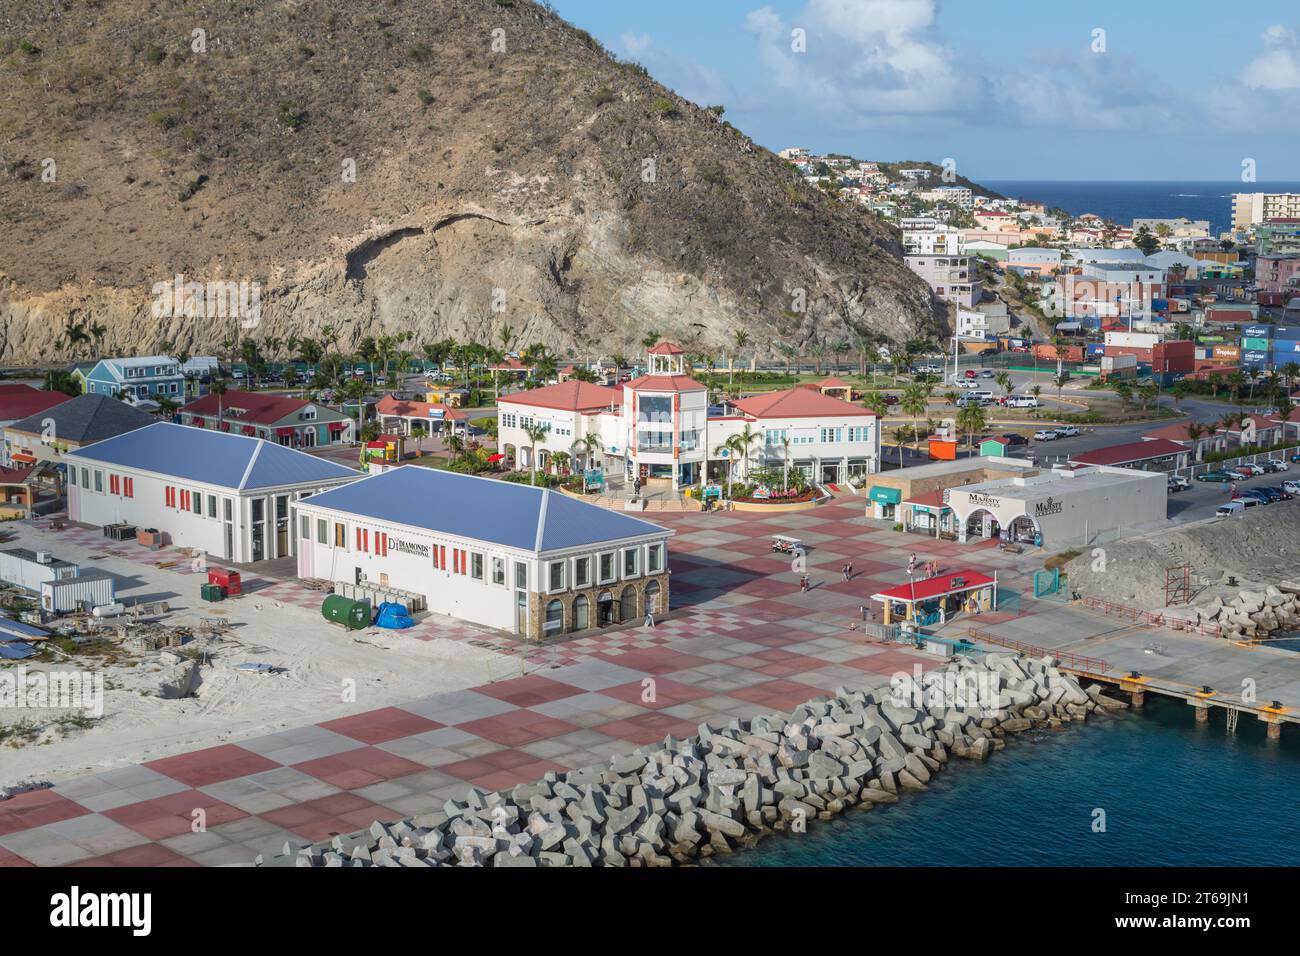 Admirals Duty Free World convenience store near the cruise ship dock at the port of Phillipsburg, St. Maarten in the Caribbean Stock Photo